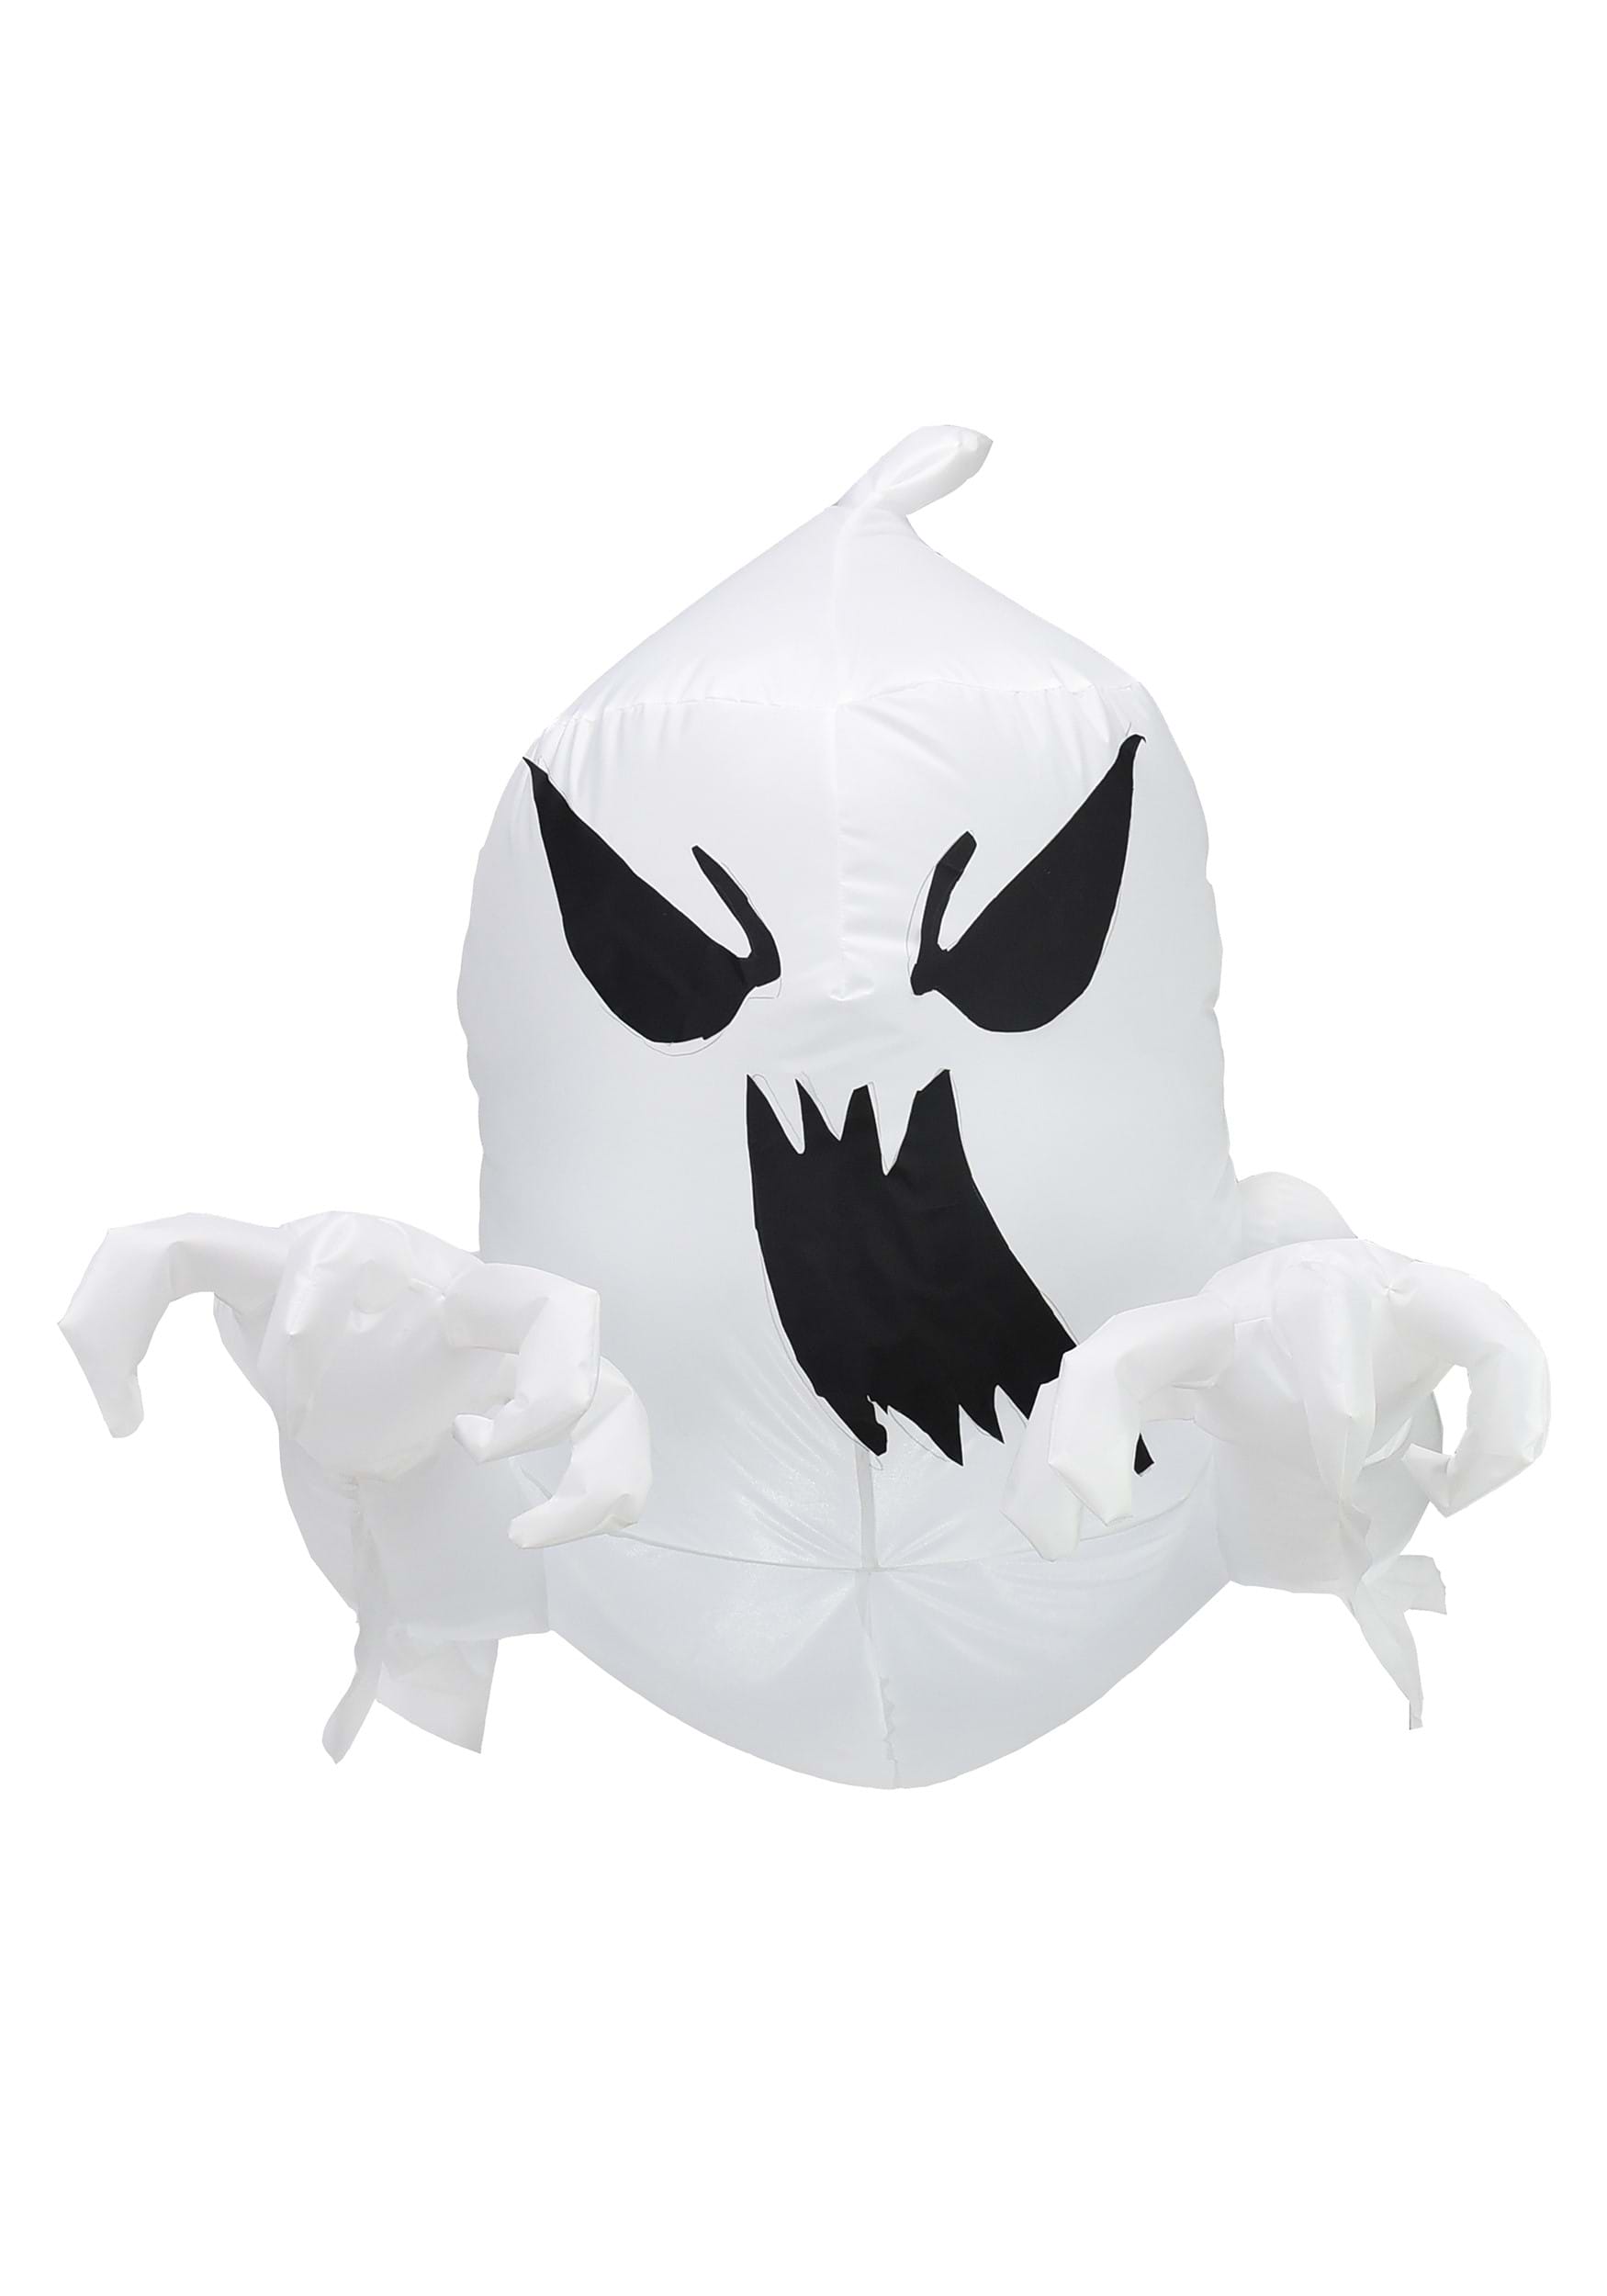 5FT Tall Ghost Window Breaker Inflatable Decoration